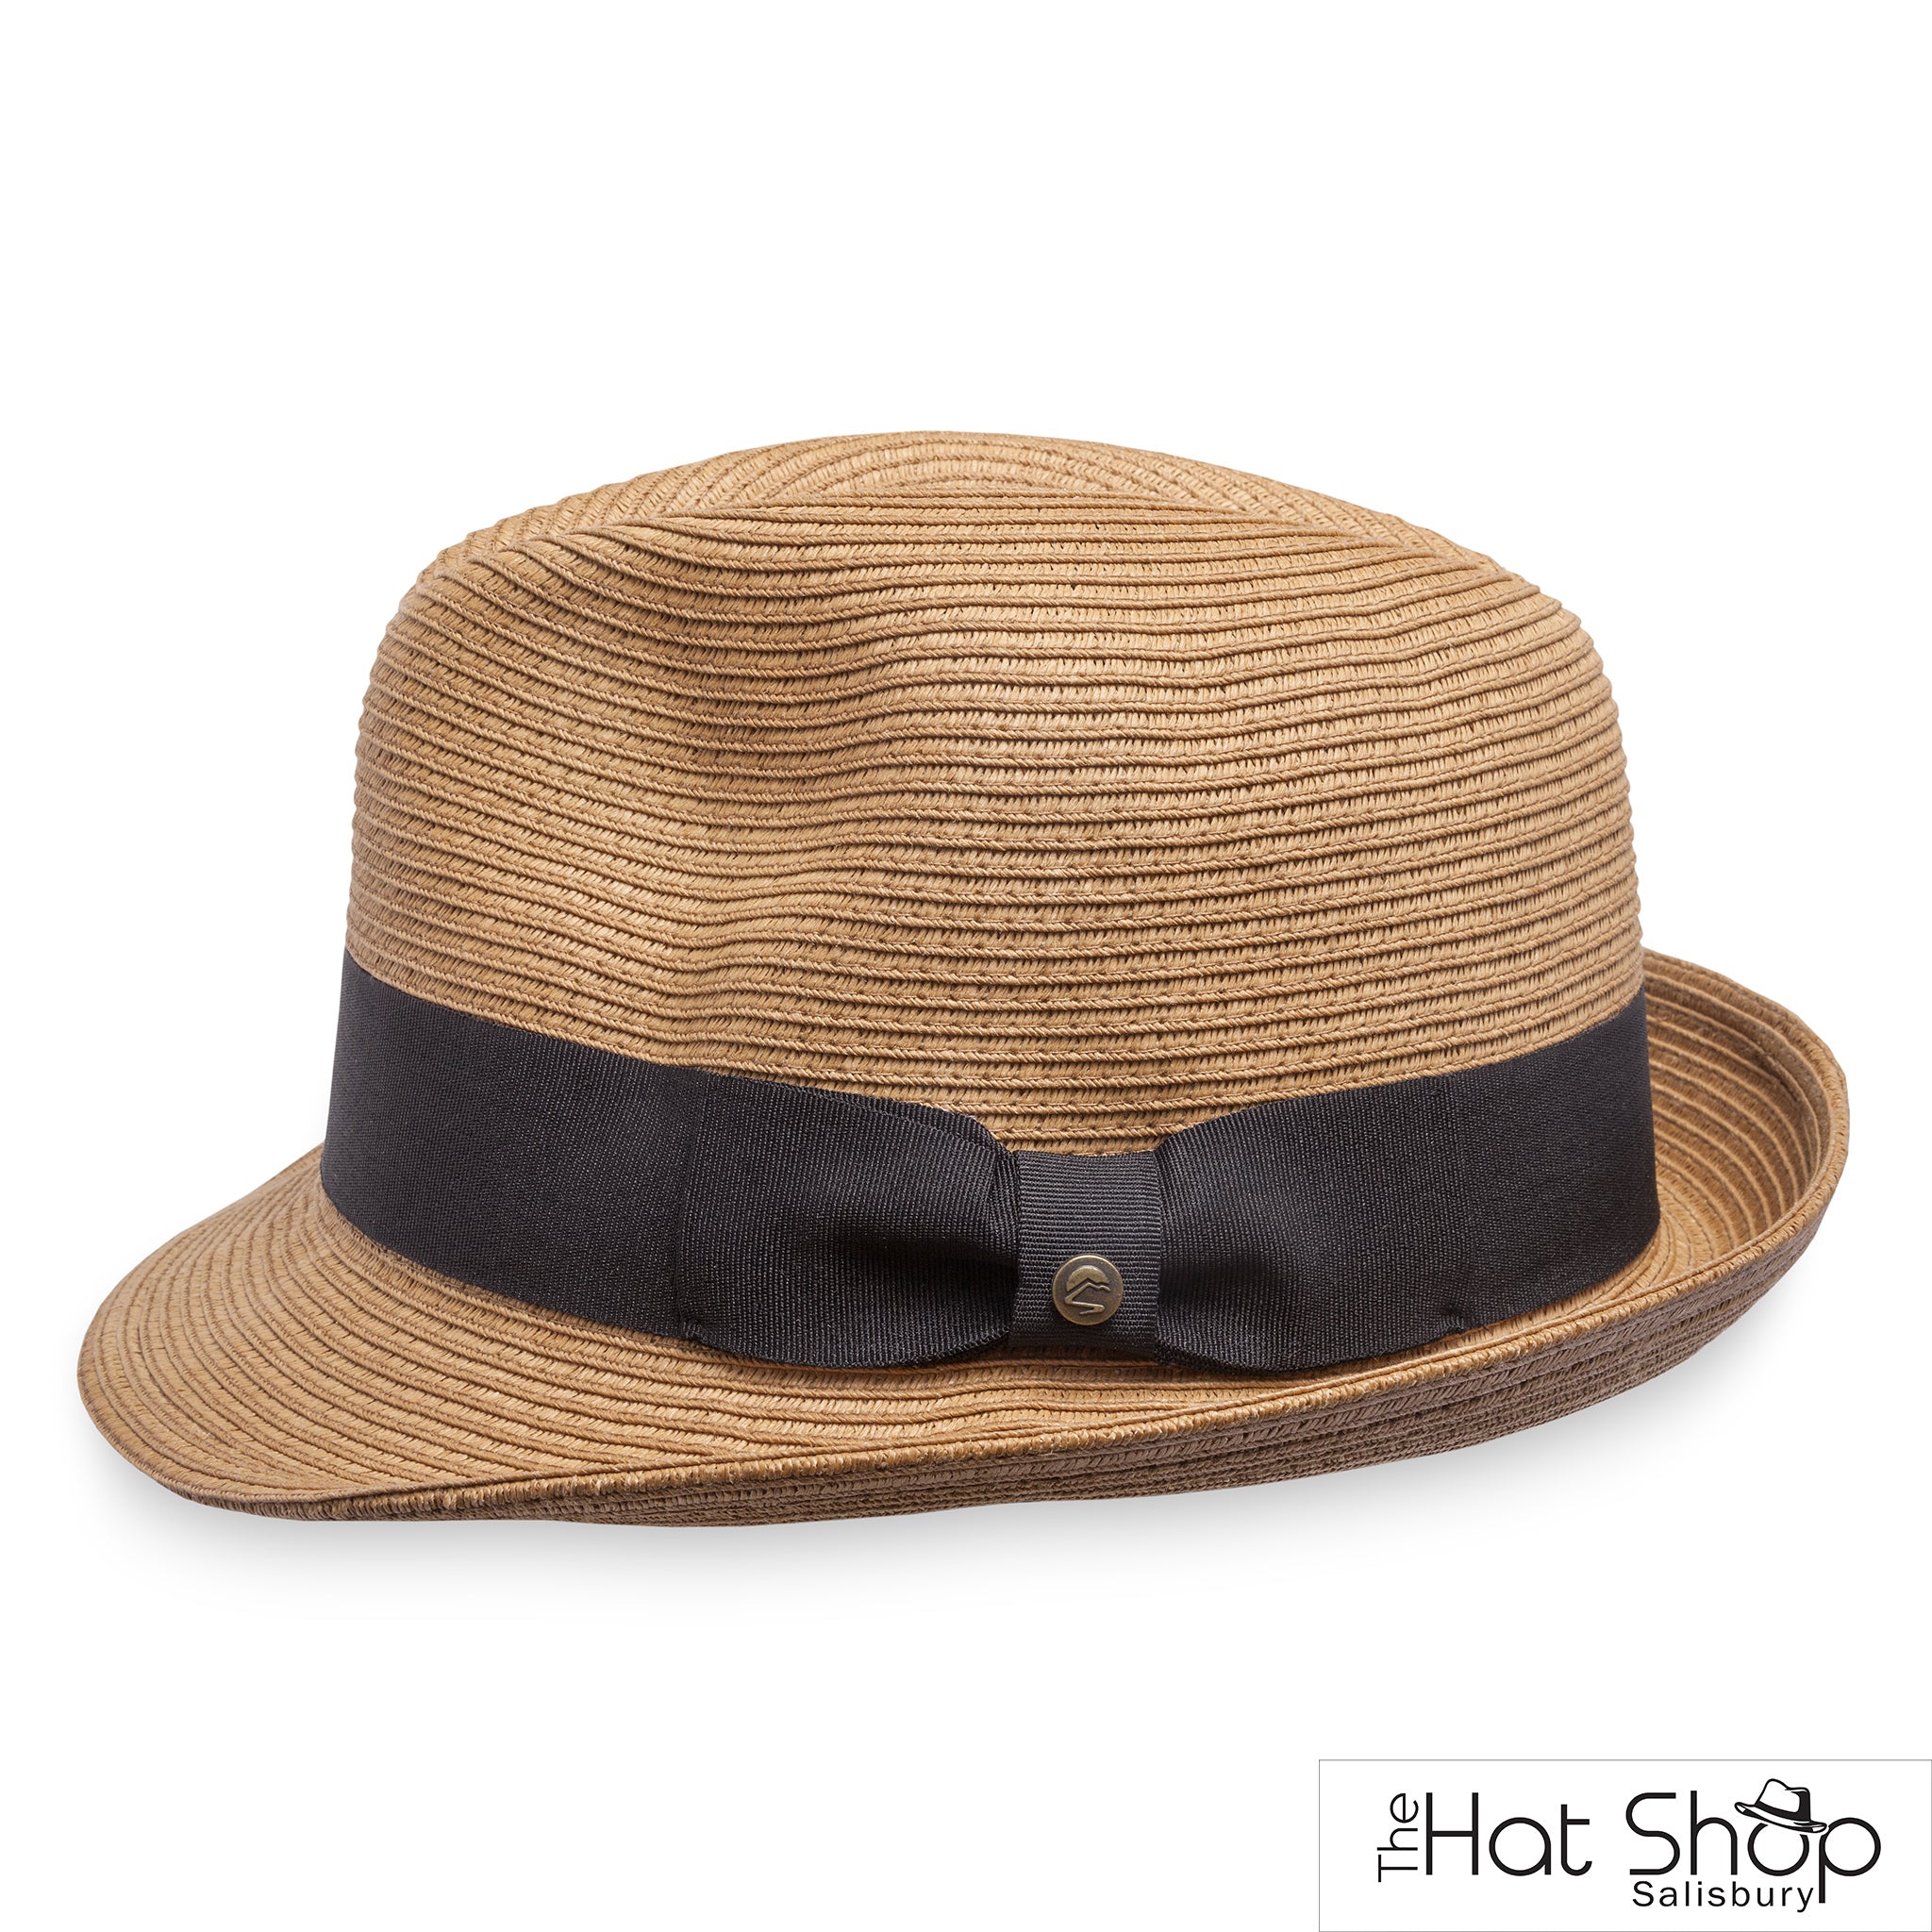 The Hat Shop Salisbury Sunday Afternoons Cayman Trilby Sun Hat Tan